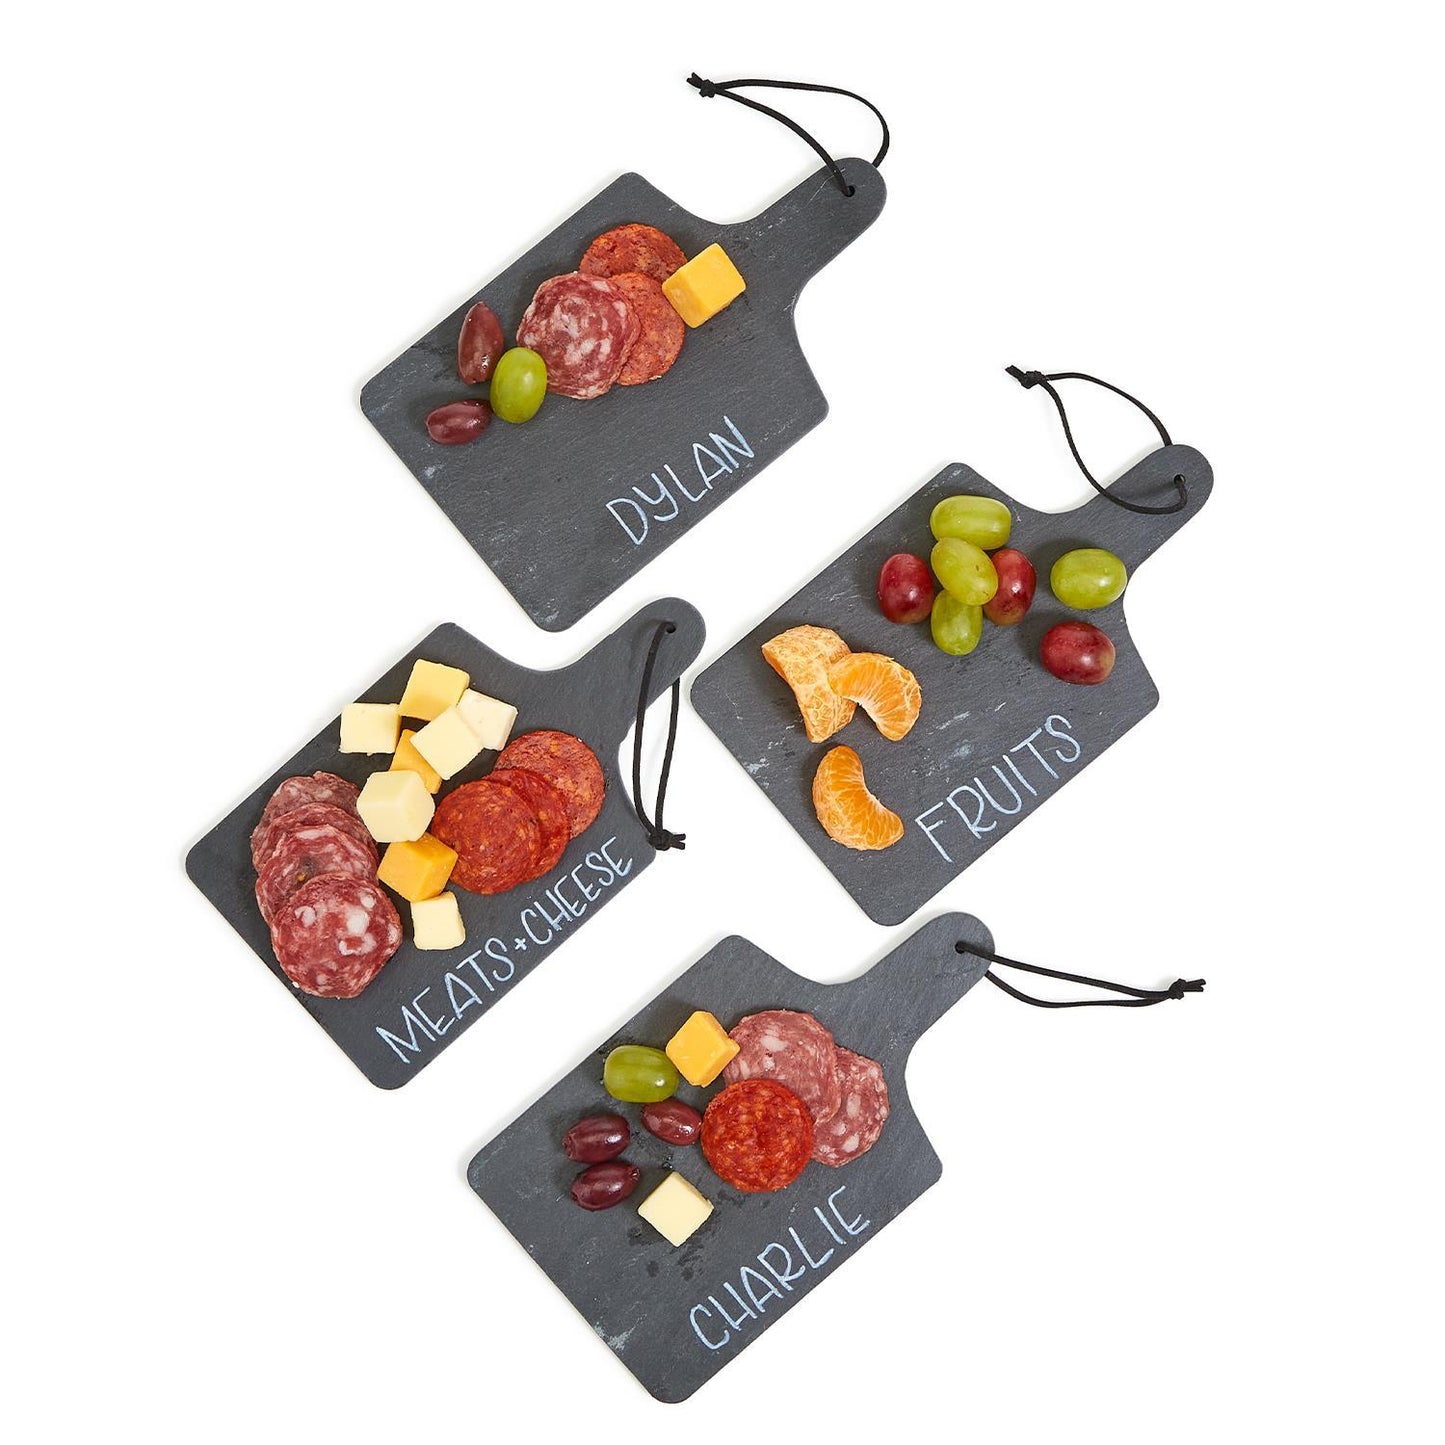 Serving Slates- Individual Charcuterie boards